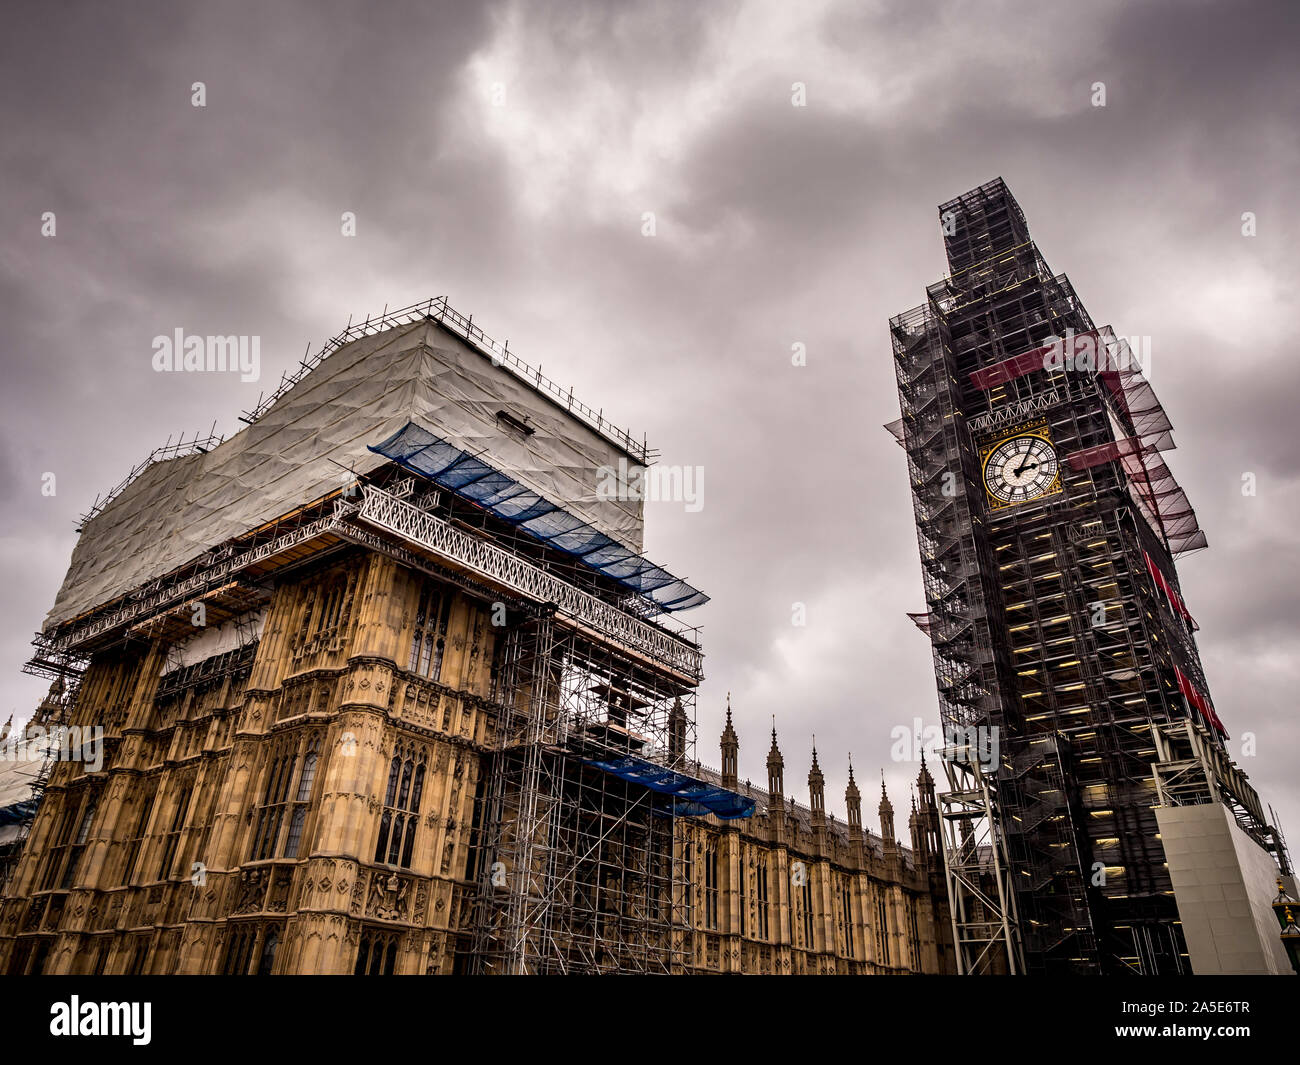 The Elizabeth Tower, known as Big Ben, almost entirely covered in scaffolding due to refurbishment work, Westminster, London, UK. Stock Photo